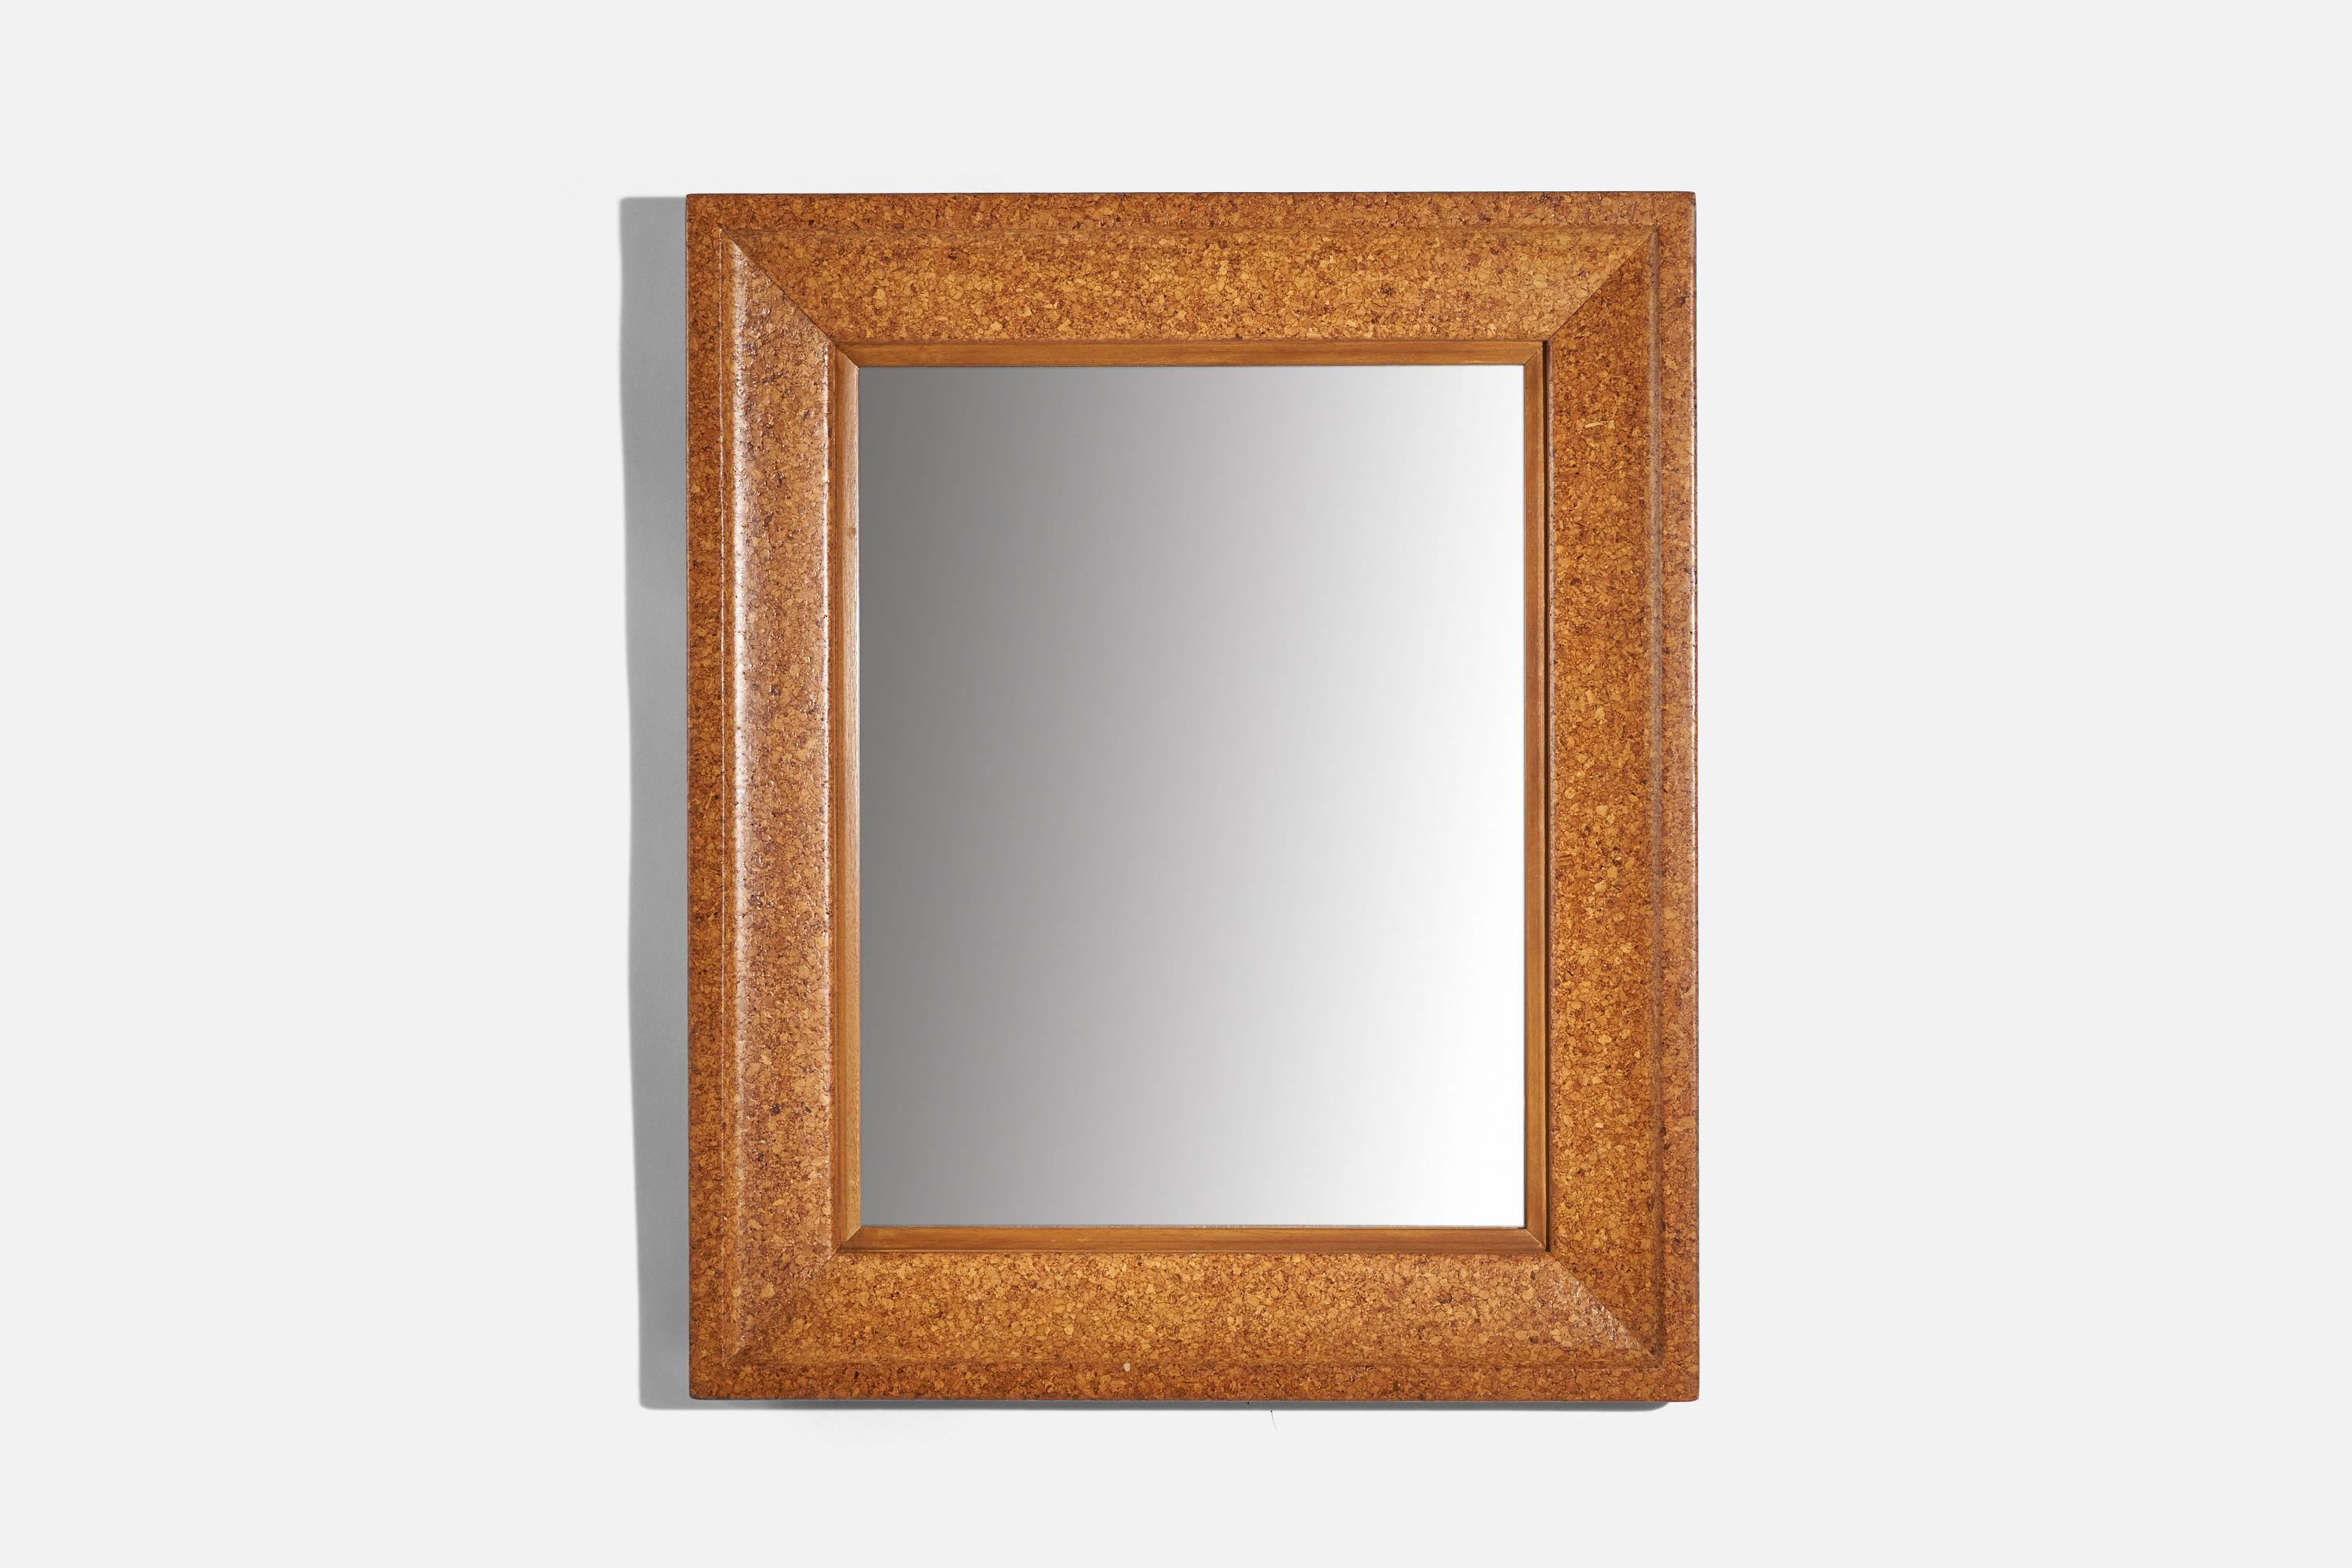 A cork wall mirror designed by Paul Frankl and produced by Johnson Furniture company, c. 1951.
 